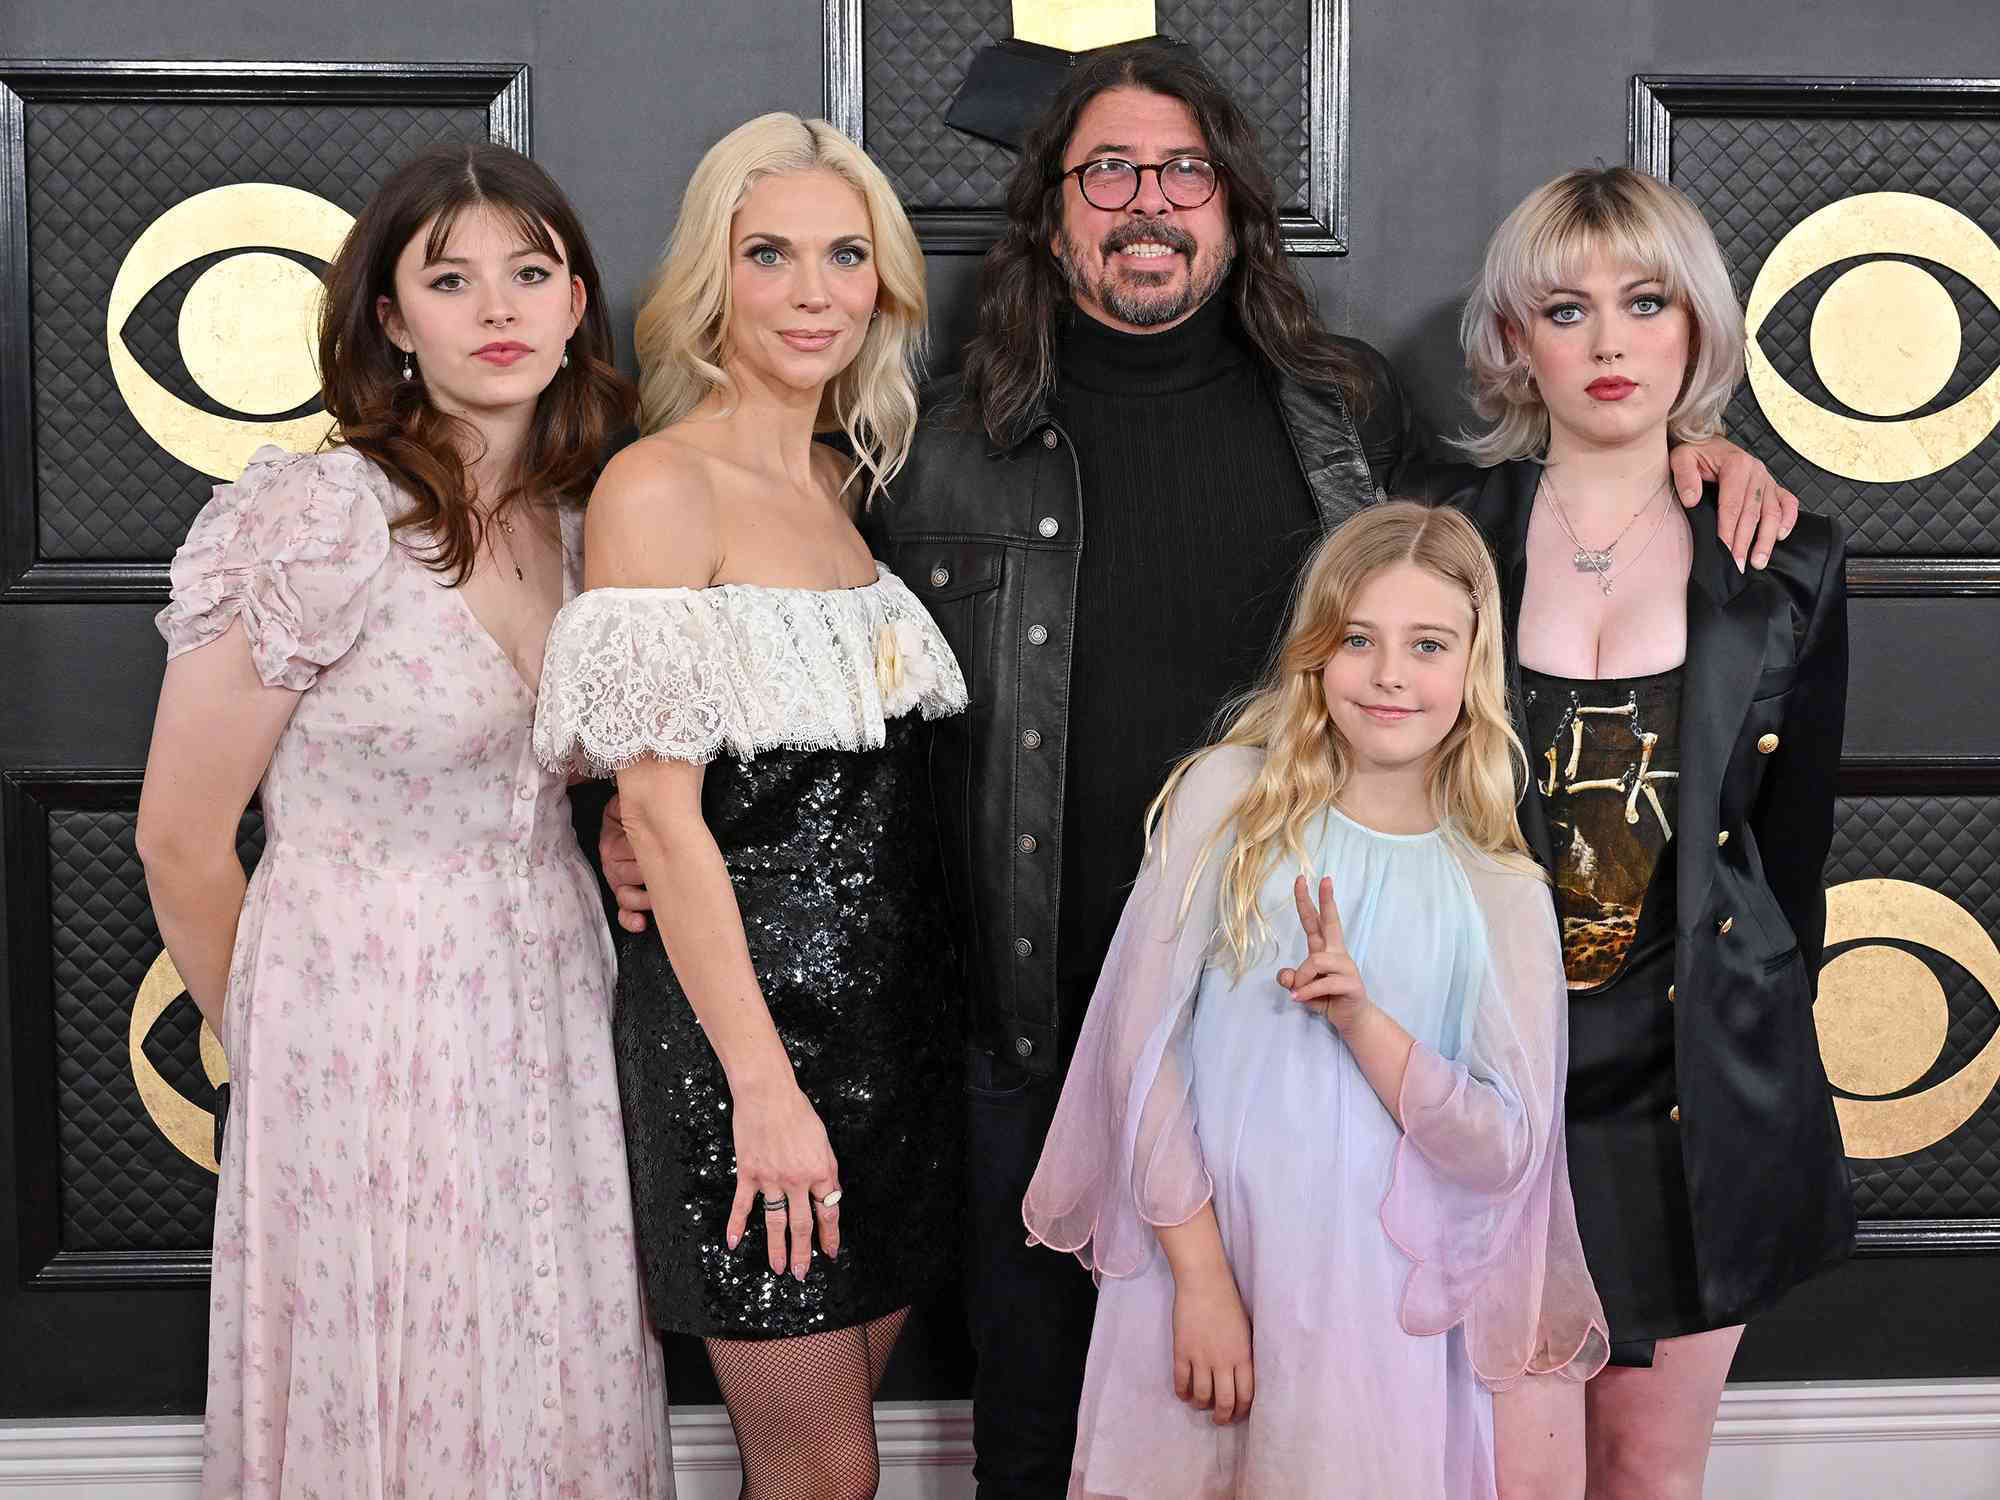 Dave Grohl's 3 Kids: All About Violet, Harper and Ophelia